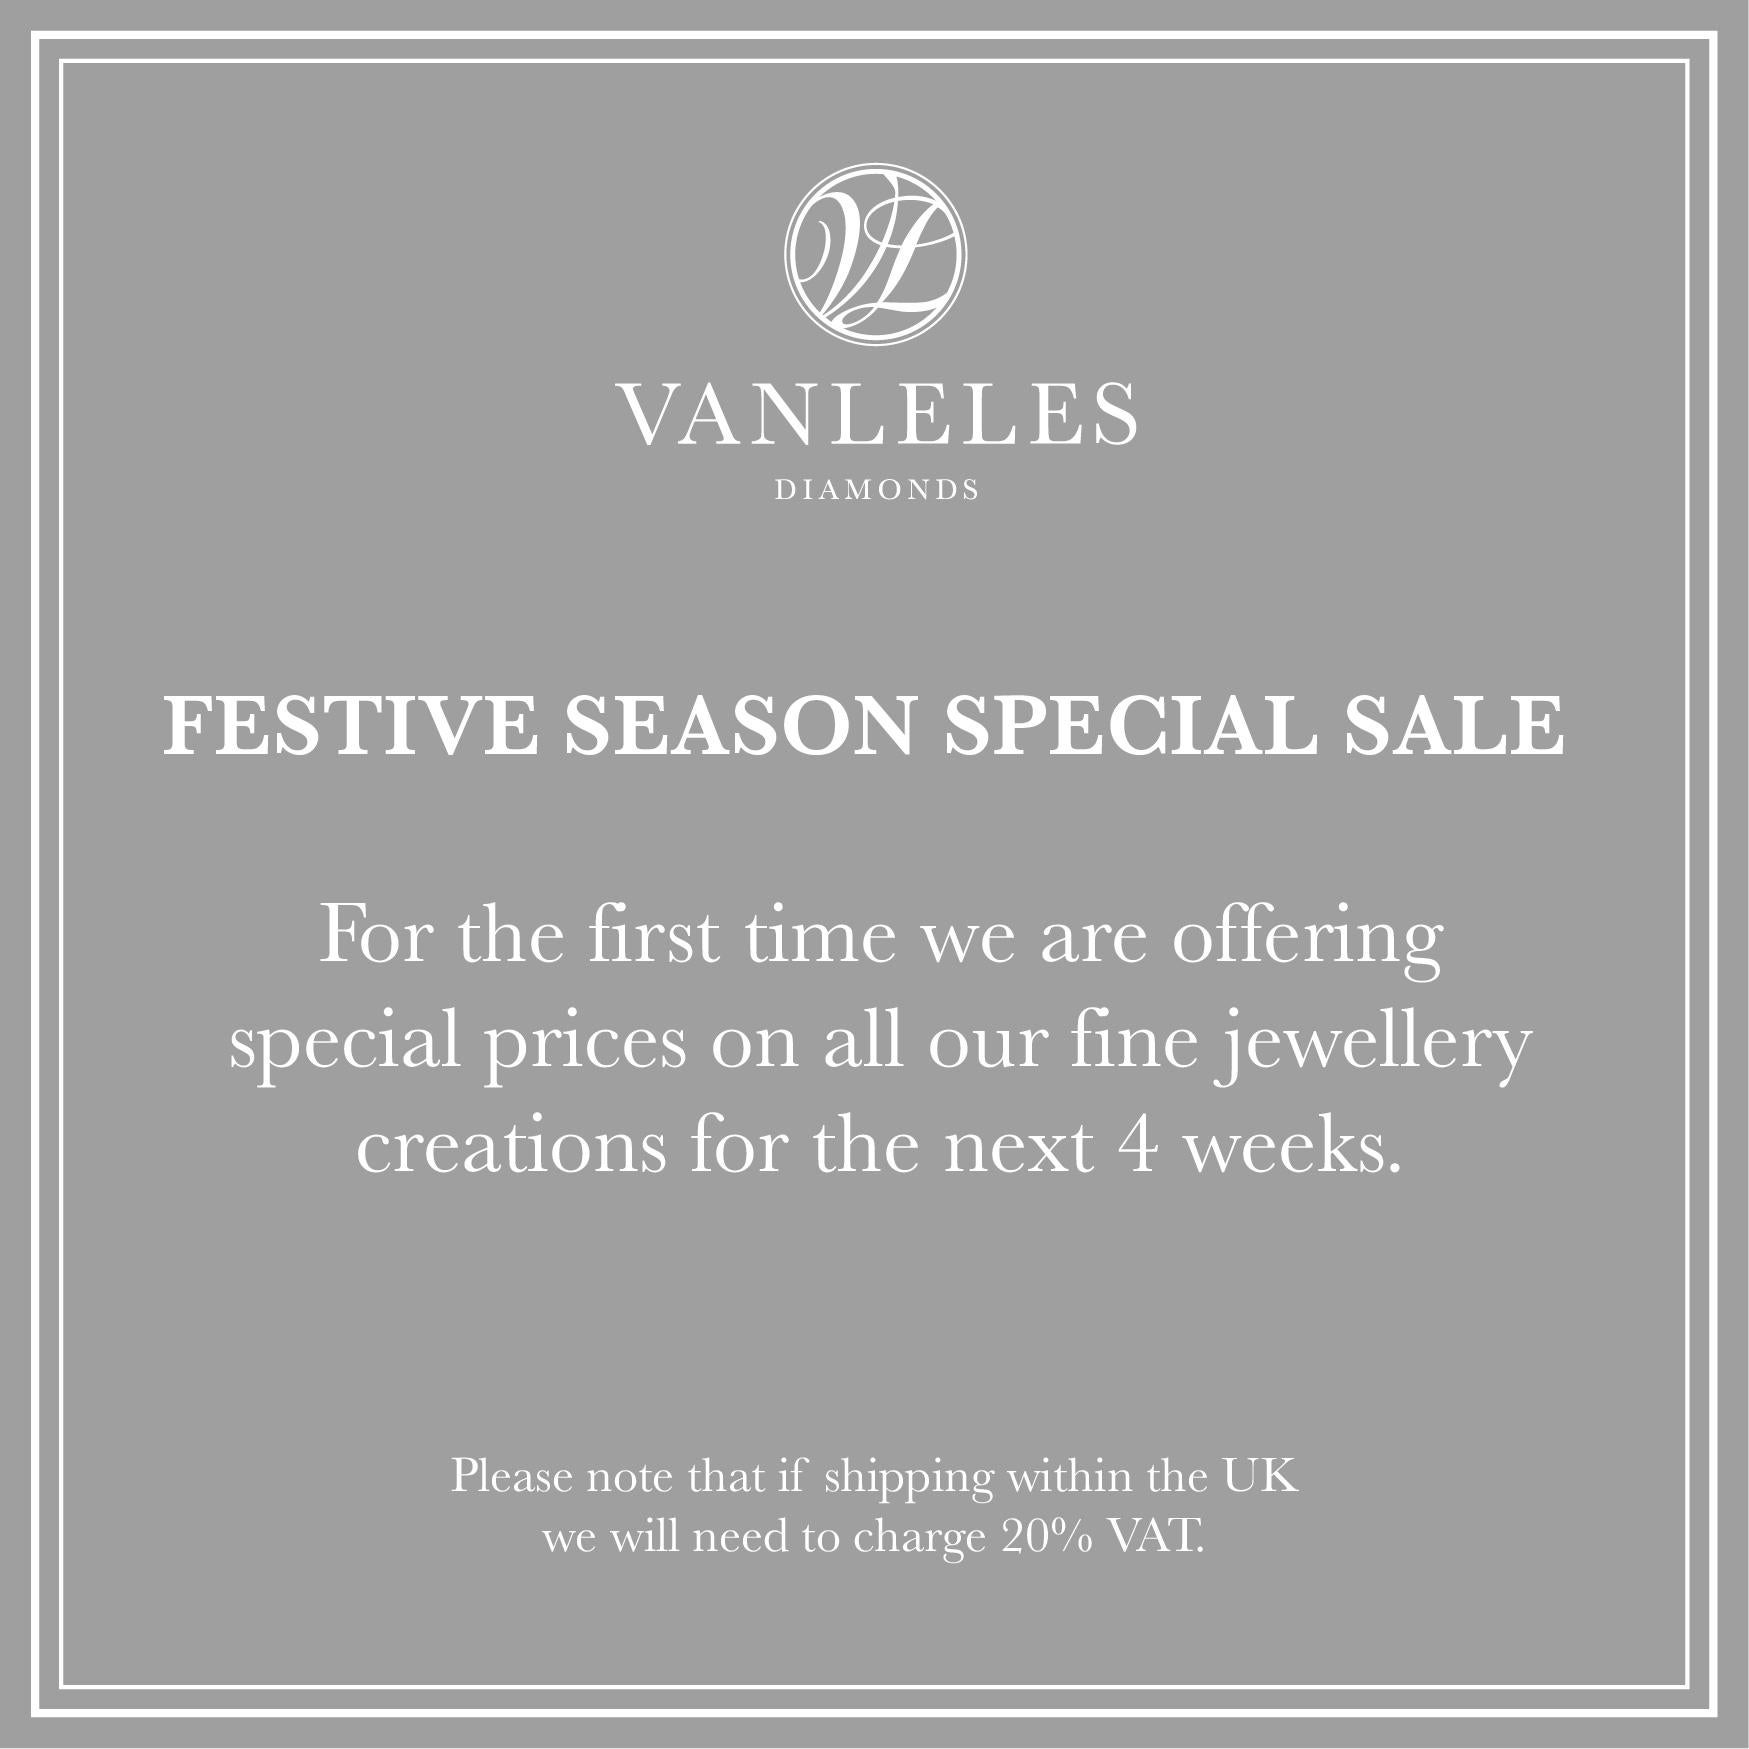 FESTIVE SEASON SPECIAL SALES - for the first time we are offering special prices on all our fine jewellery creations for the next 4 weeks.
Please note that if shipping within the UK we will need to charge 20% VAT.

Strikingly feminine and elegant,